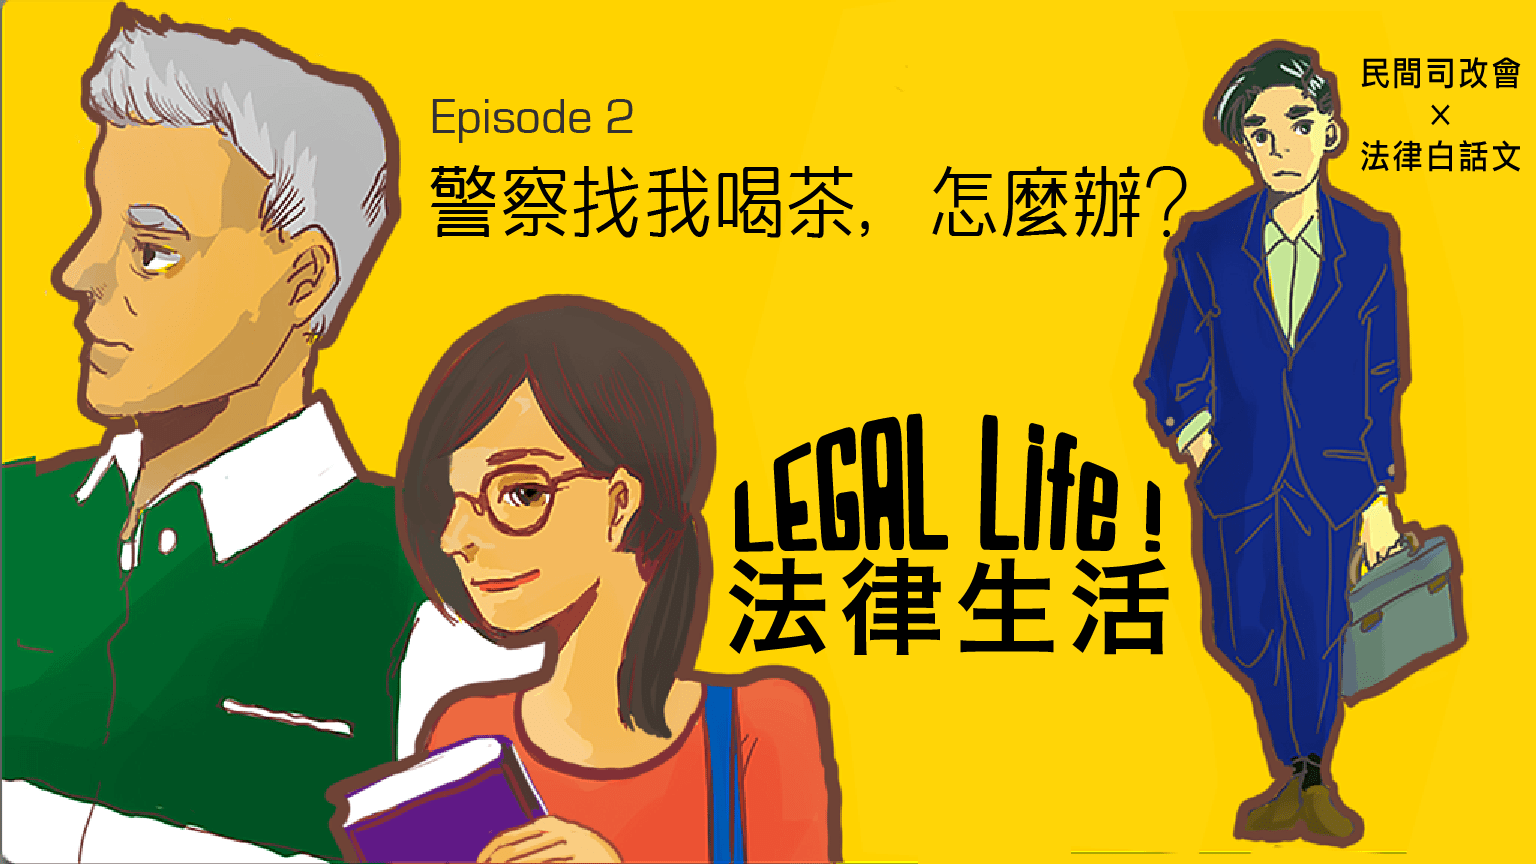 2016/06/legal-life-ep2-1.png